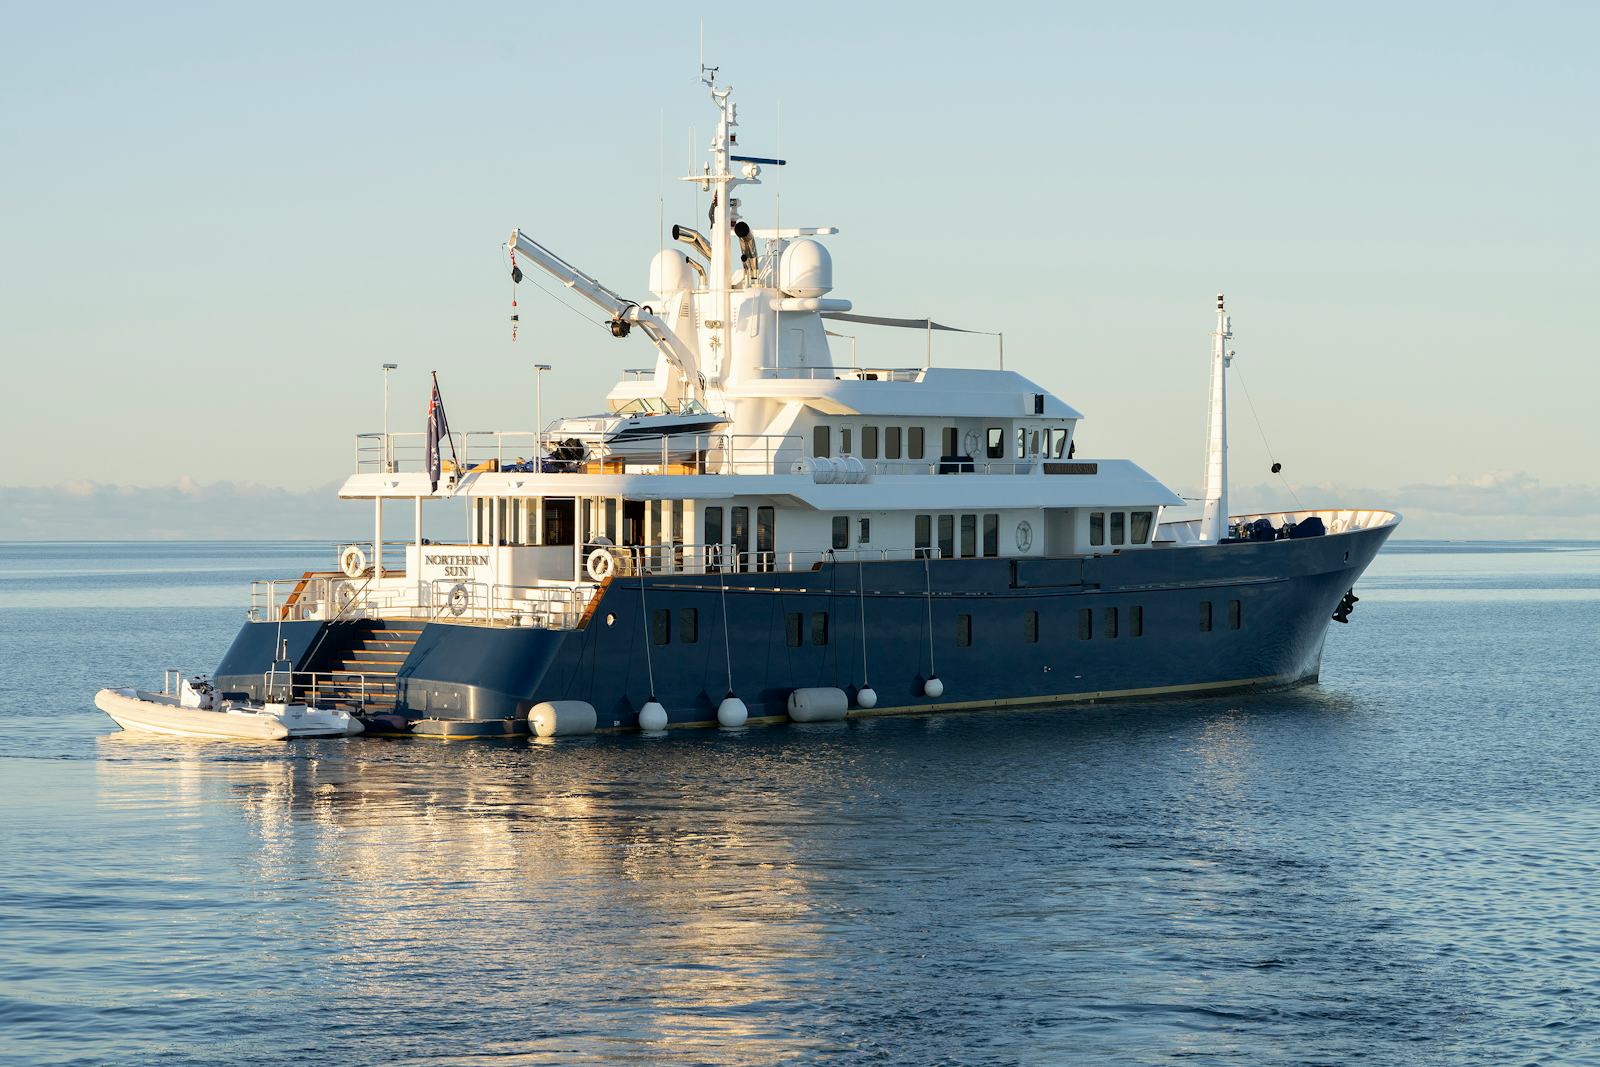 northern sun yacht cost to charter